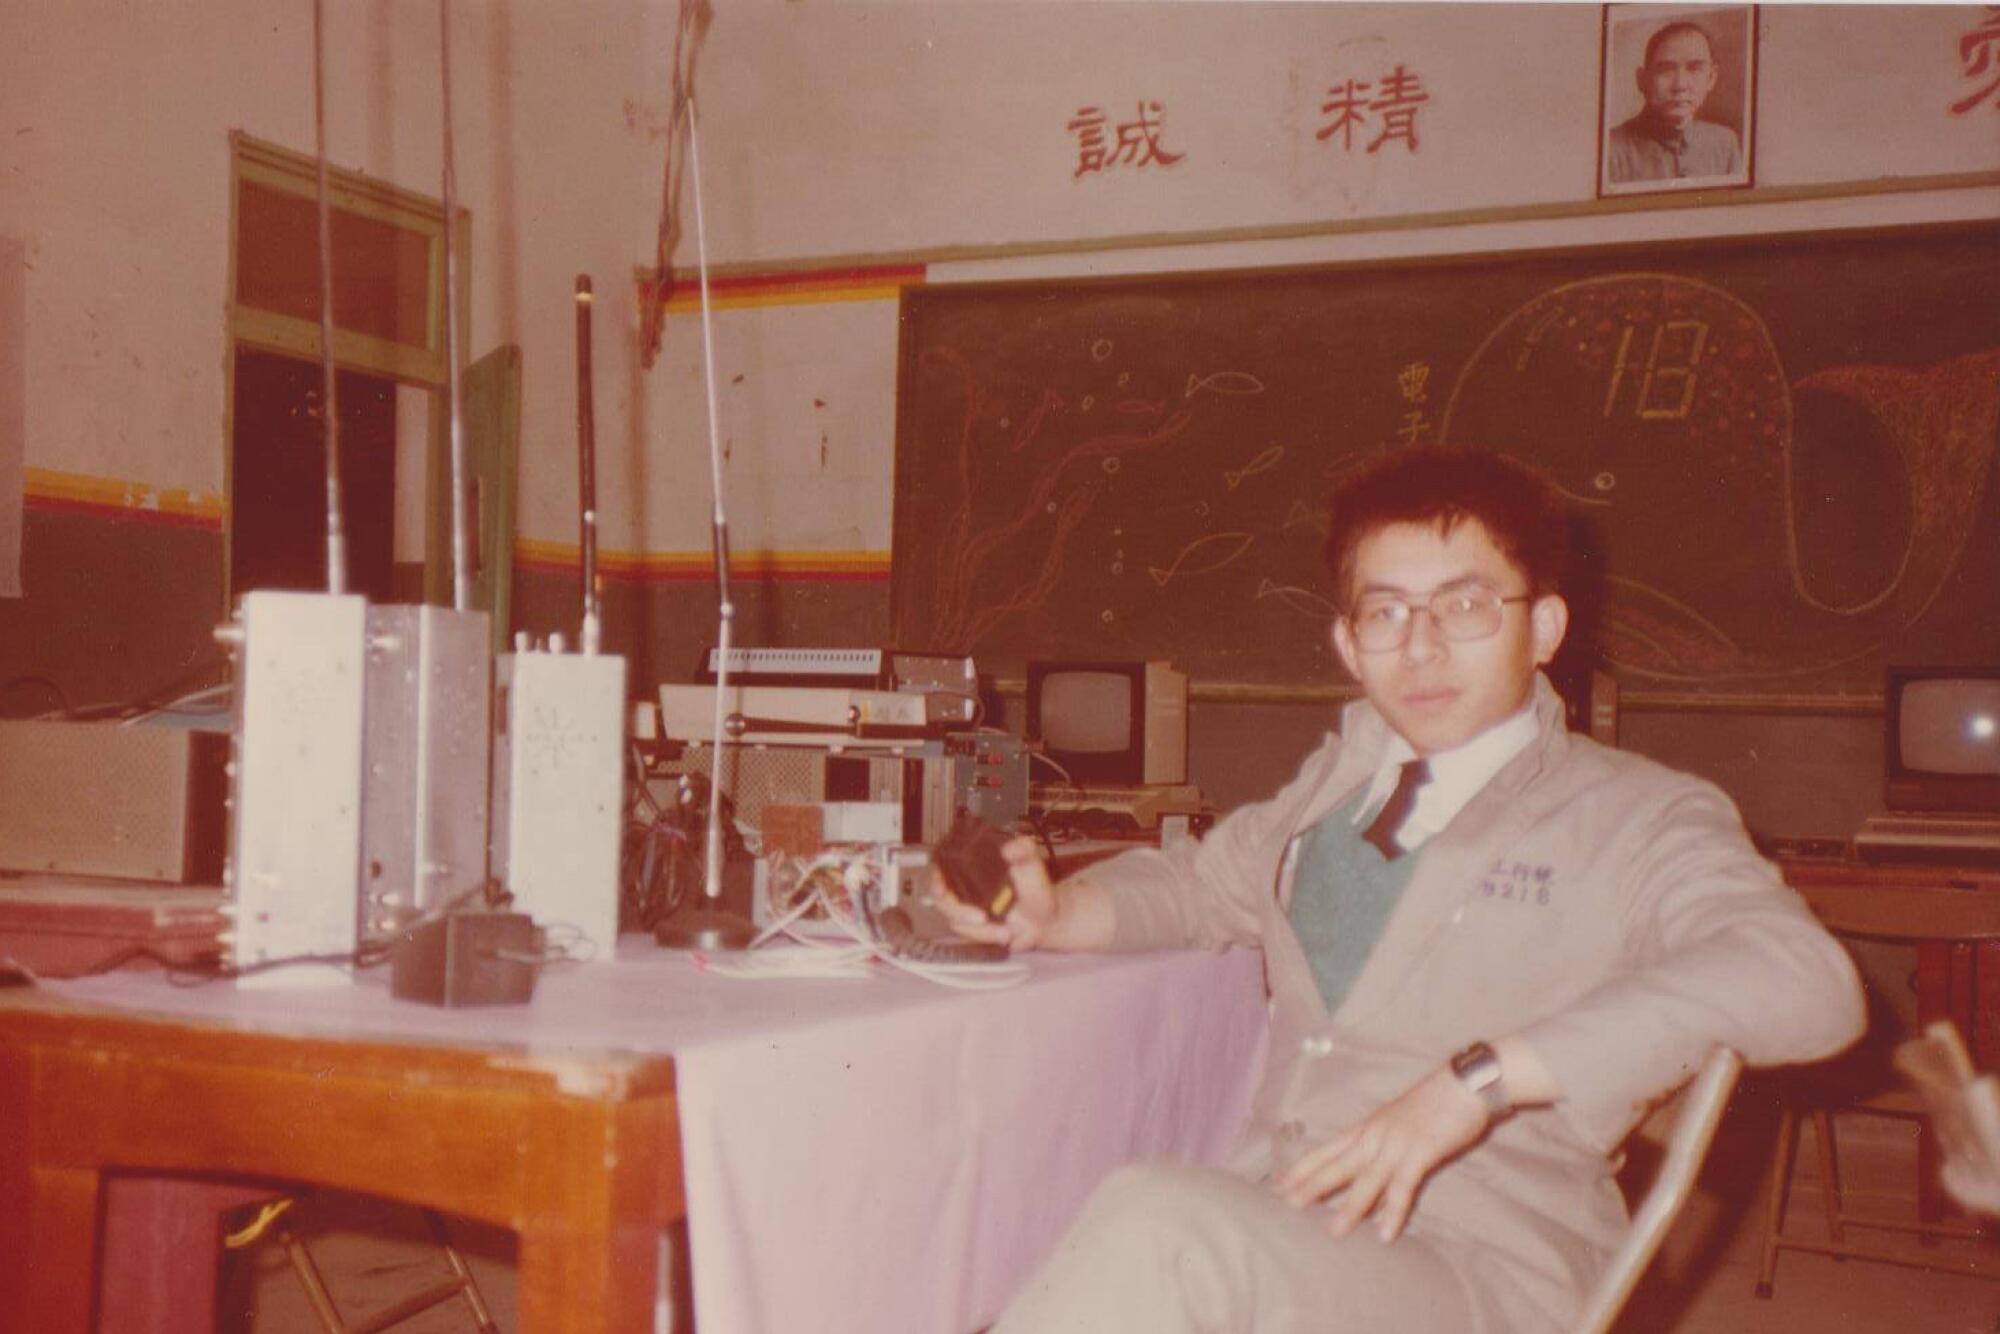 A young man in beige suit and glasses, seated at a table with radio equipment